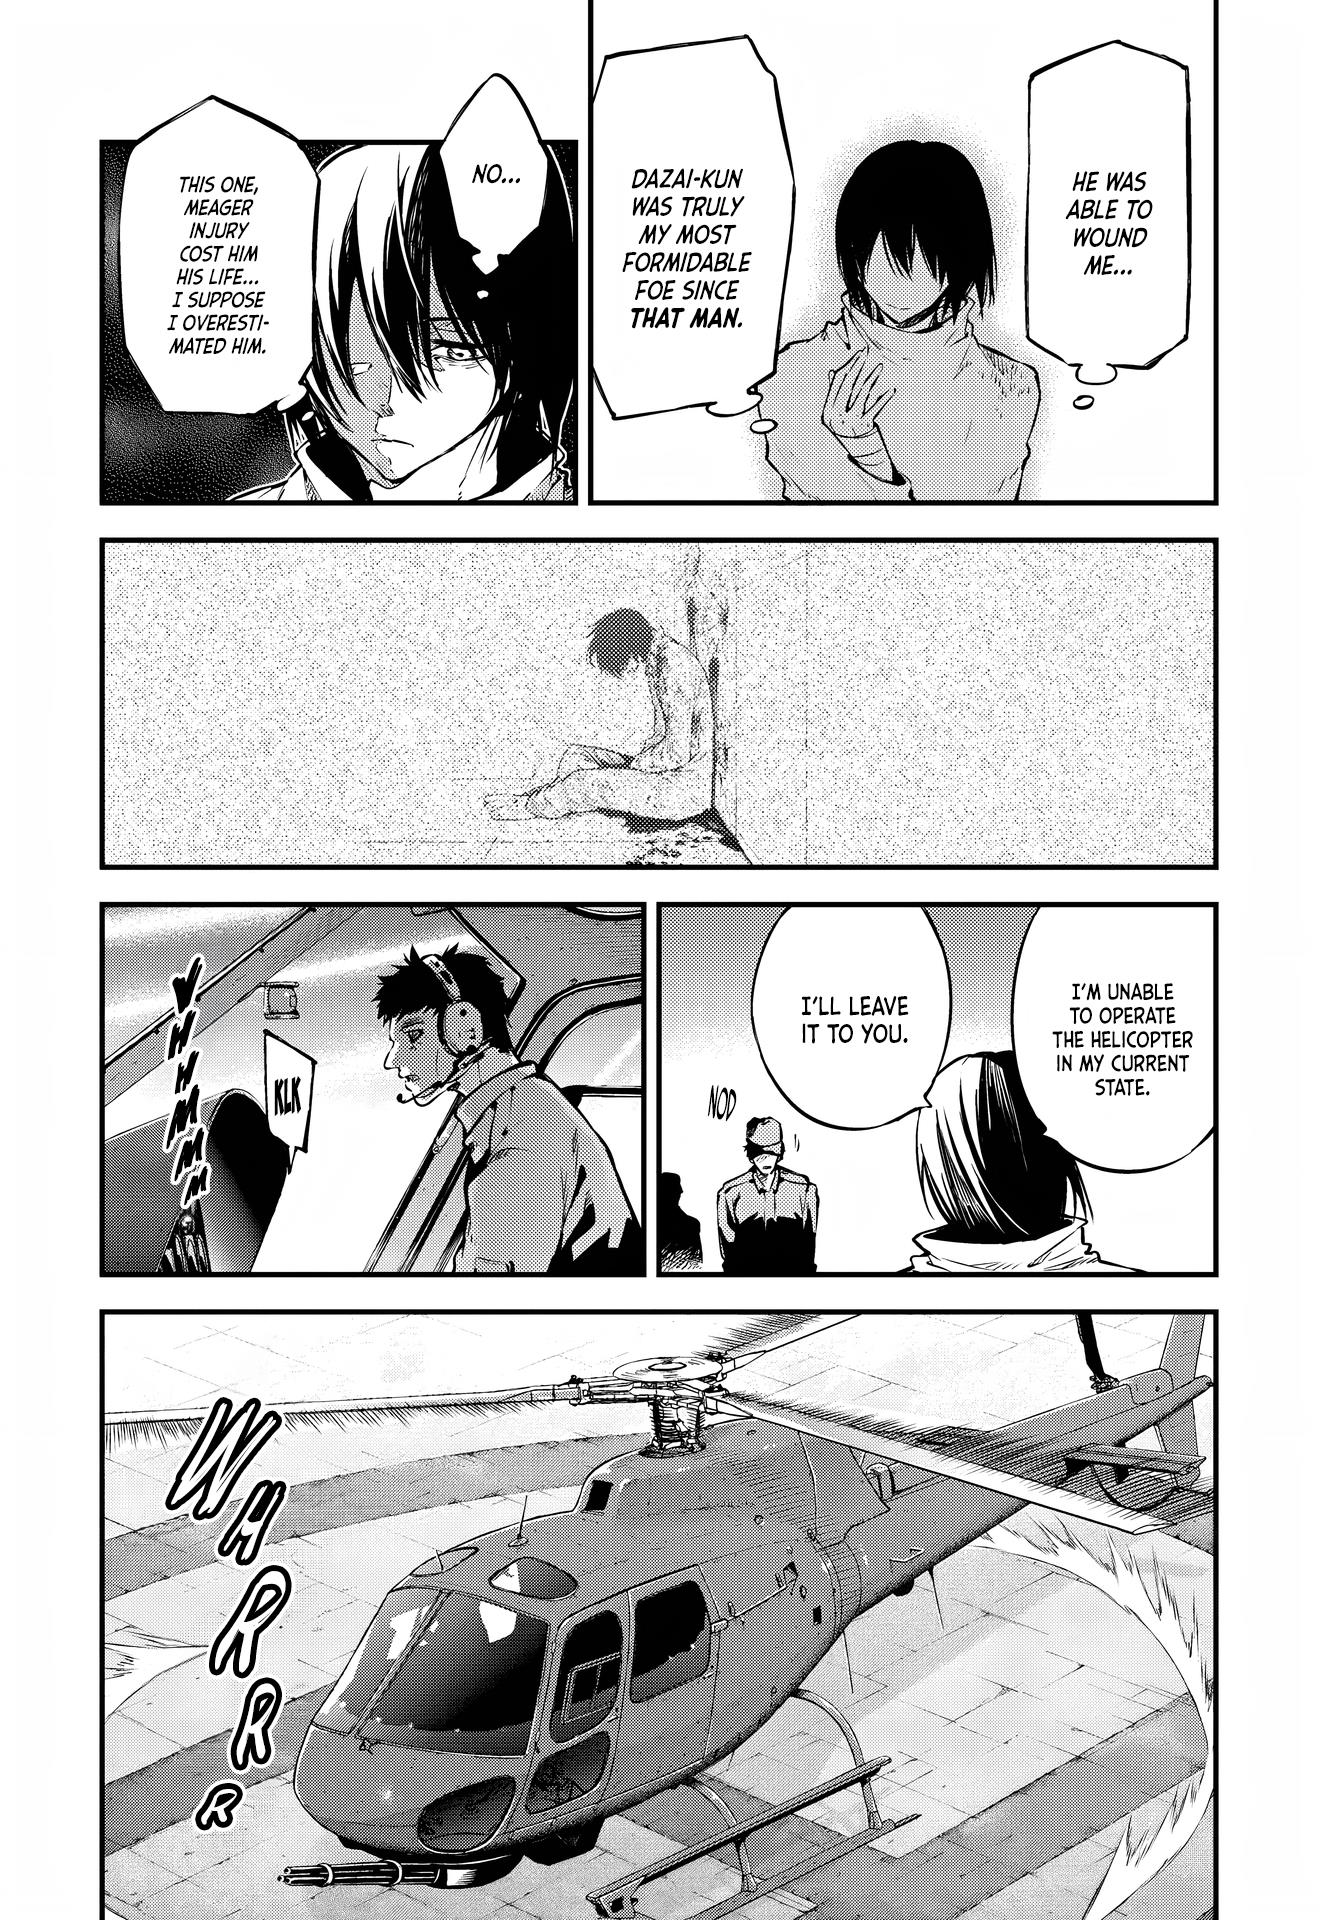 Bungou Stray Dogs, Chapter 111 You Simply Can